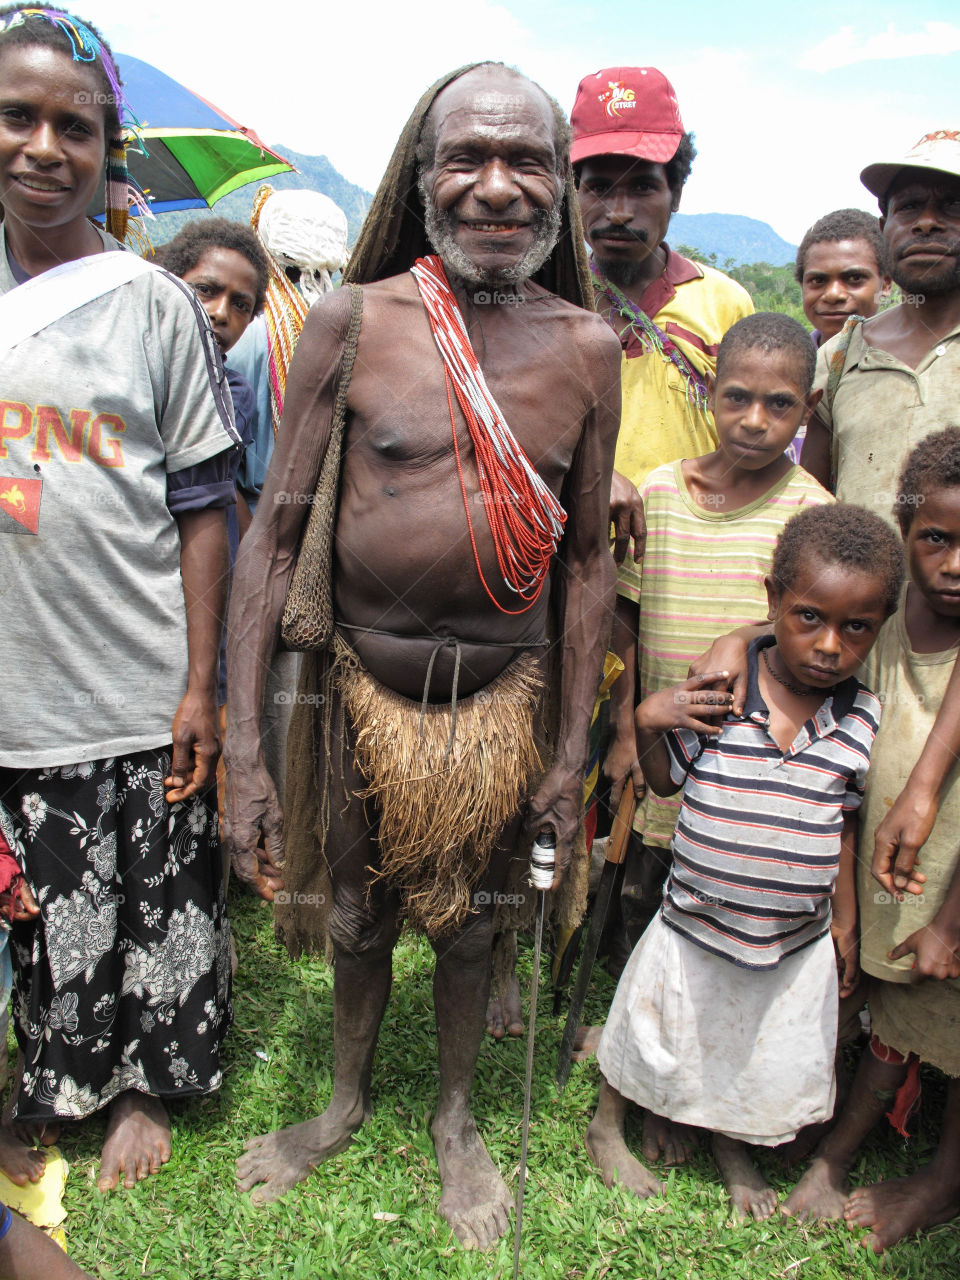 Elder man in traditional garb, Eastern Highlands Province, Papua New Guinea 